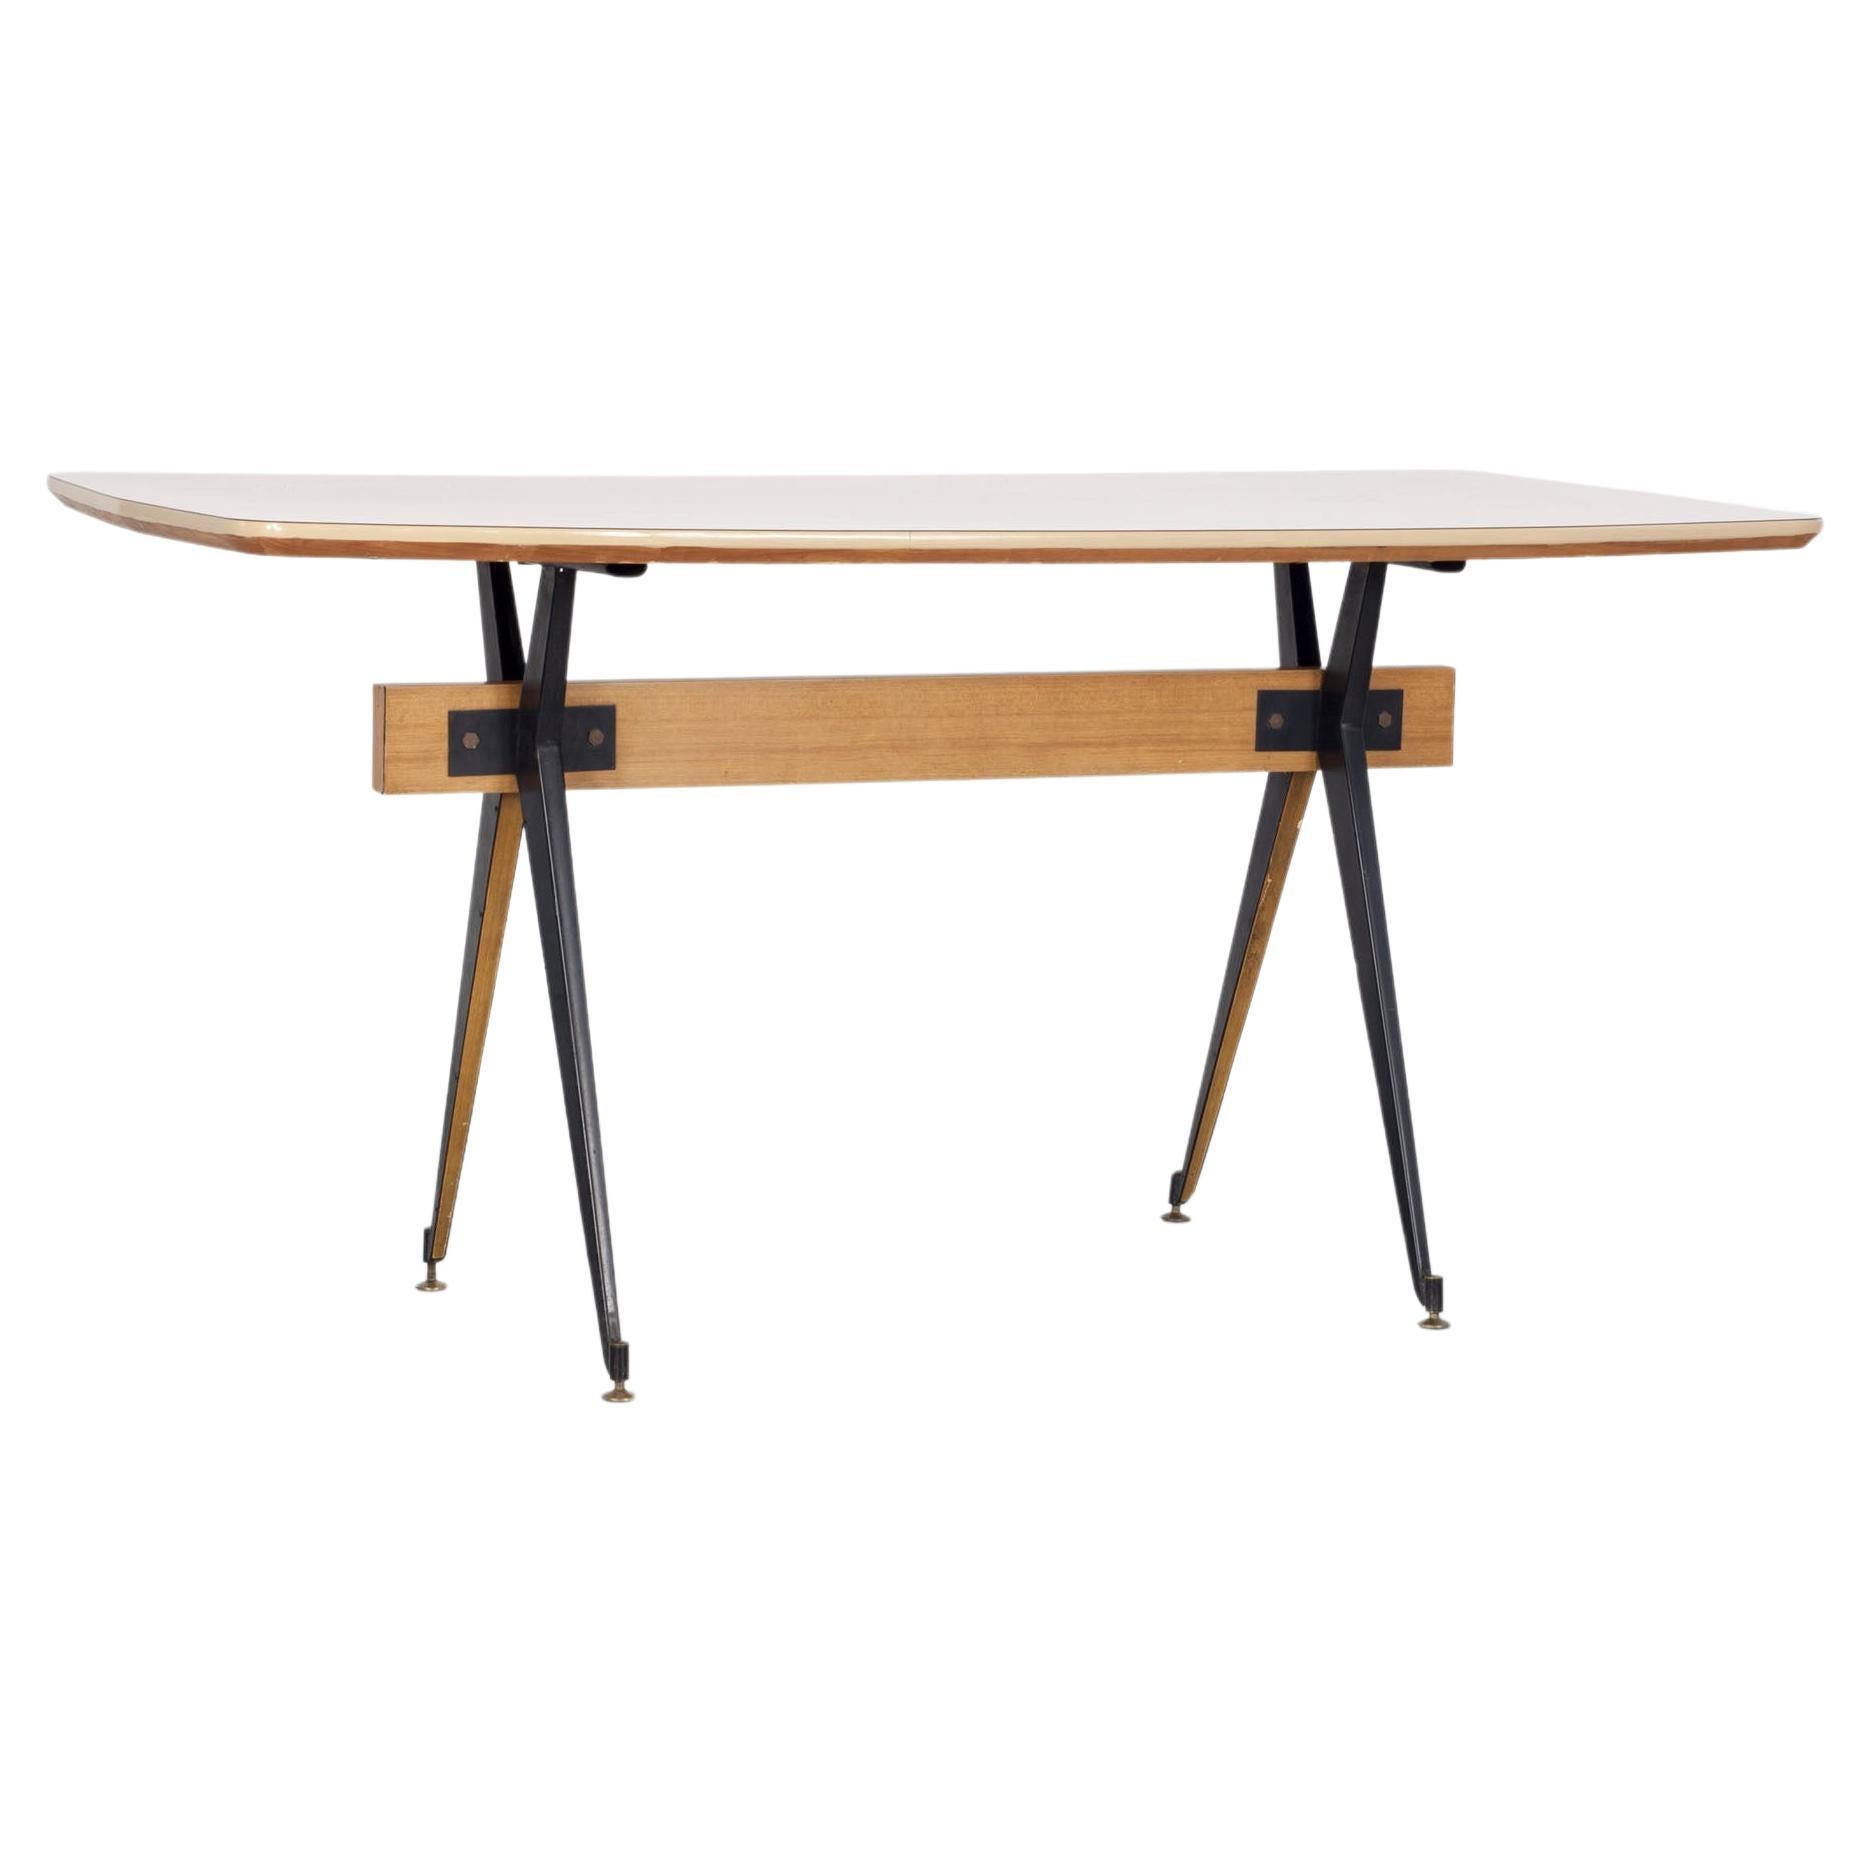 Dining table by Carlo Ratti made by Industria Legni Curvati, 1950s, Italy For Sale